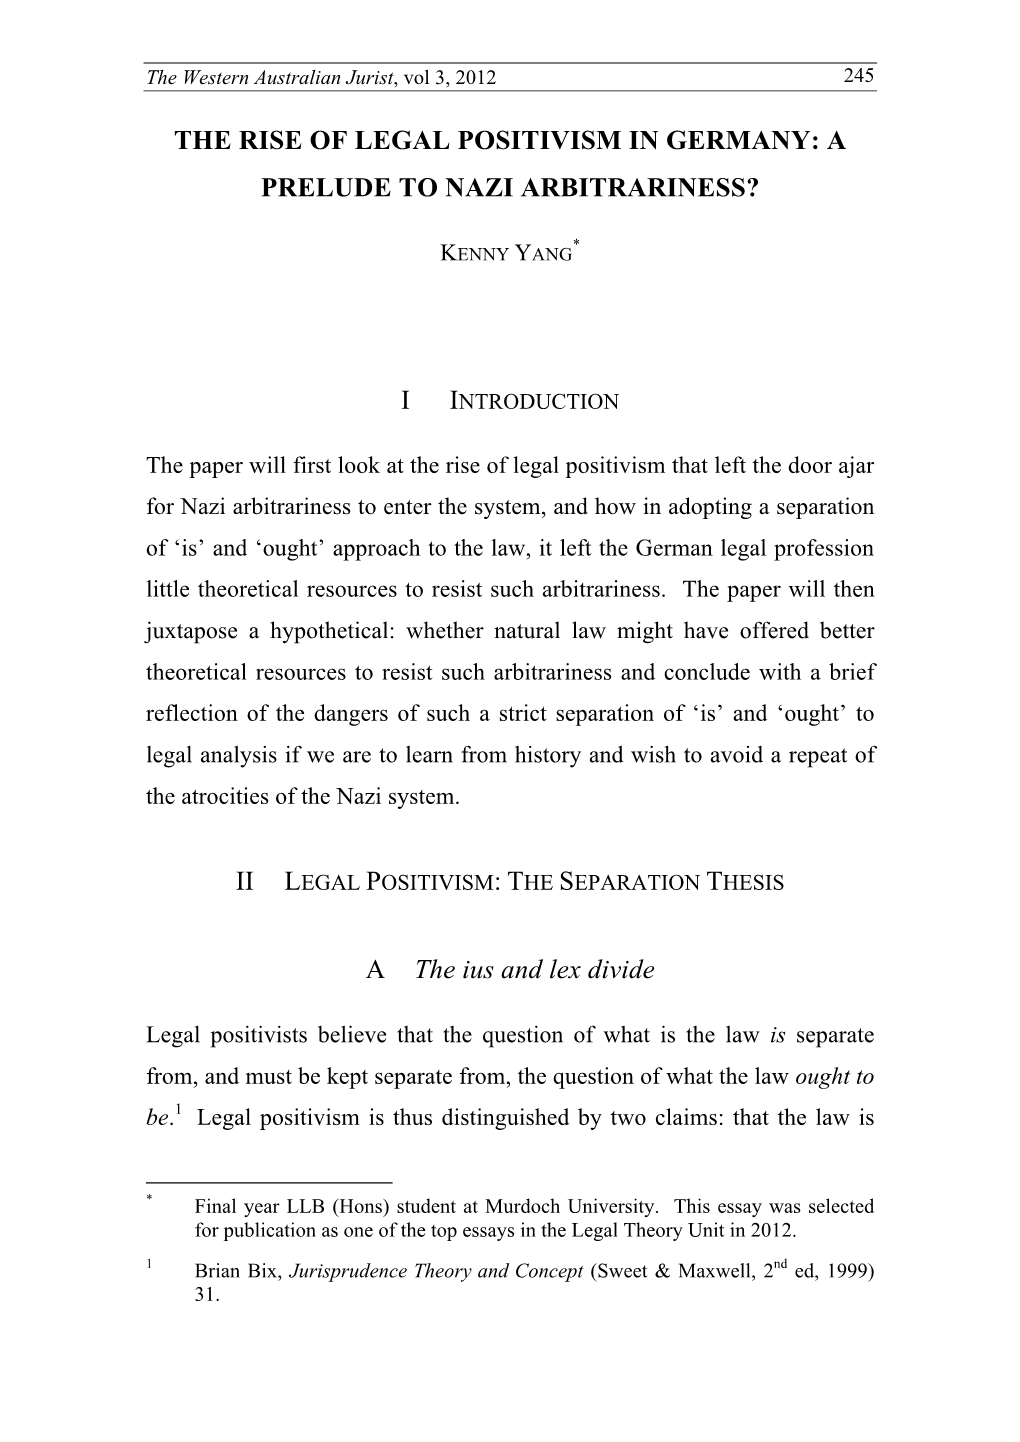 The Rise of Legal Positivism in Germany: a Prelude to Nazi Arbitrariness?